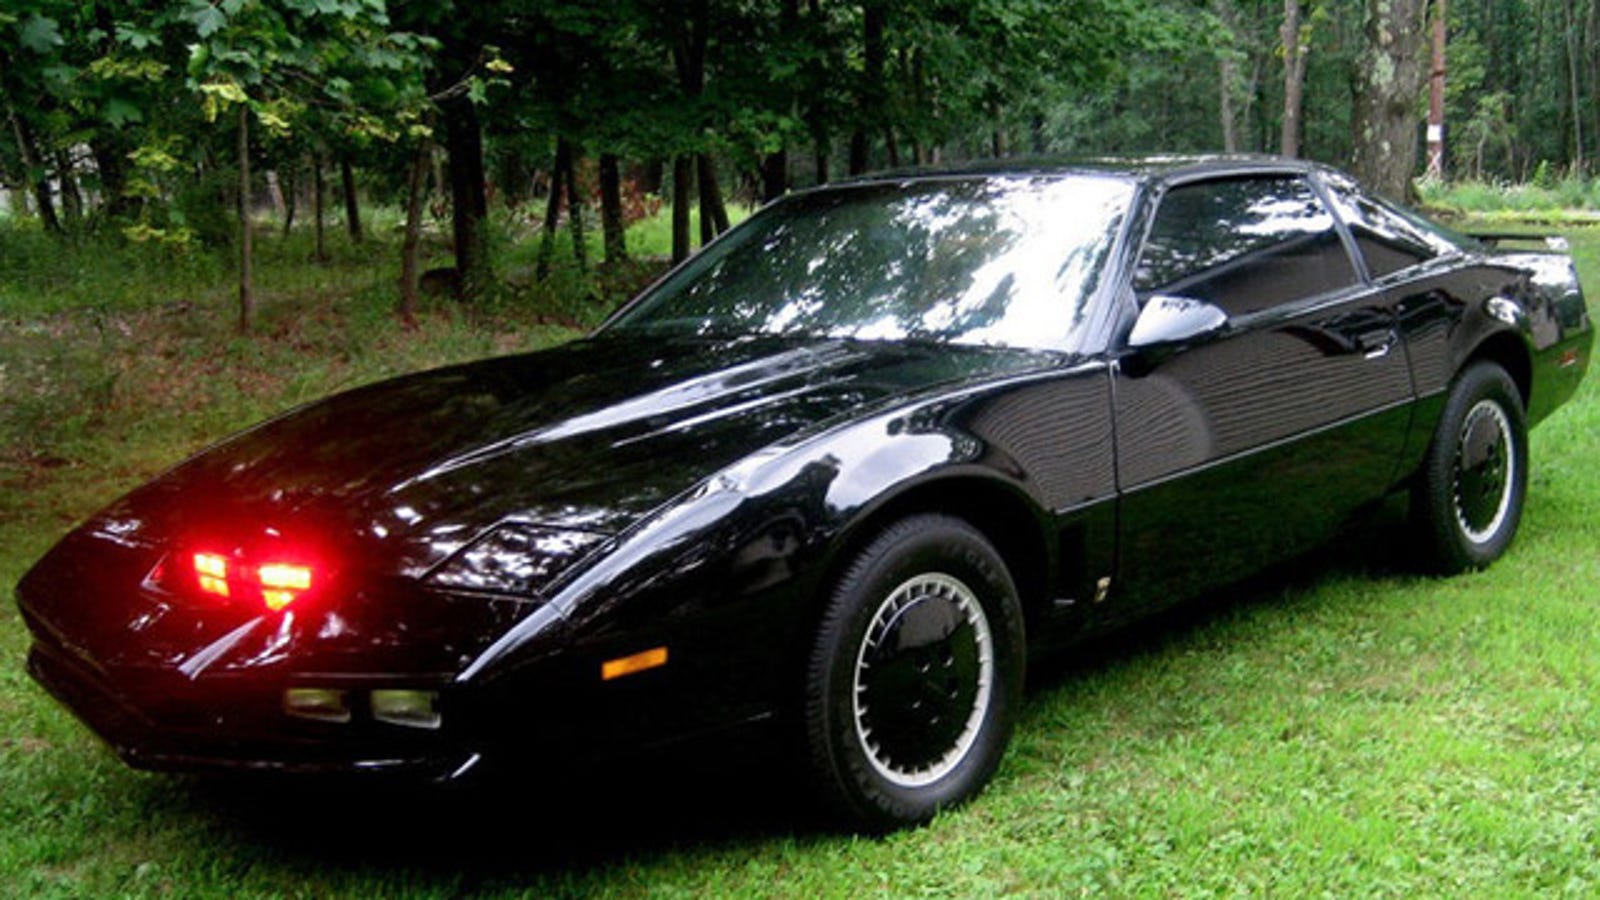 Original Kitt From Knight Rider Goes Up For Auction